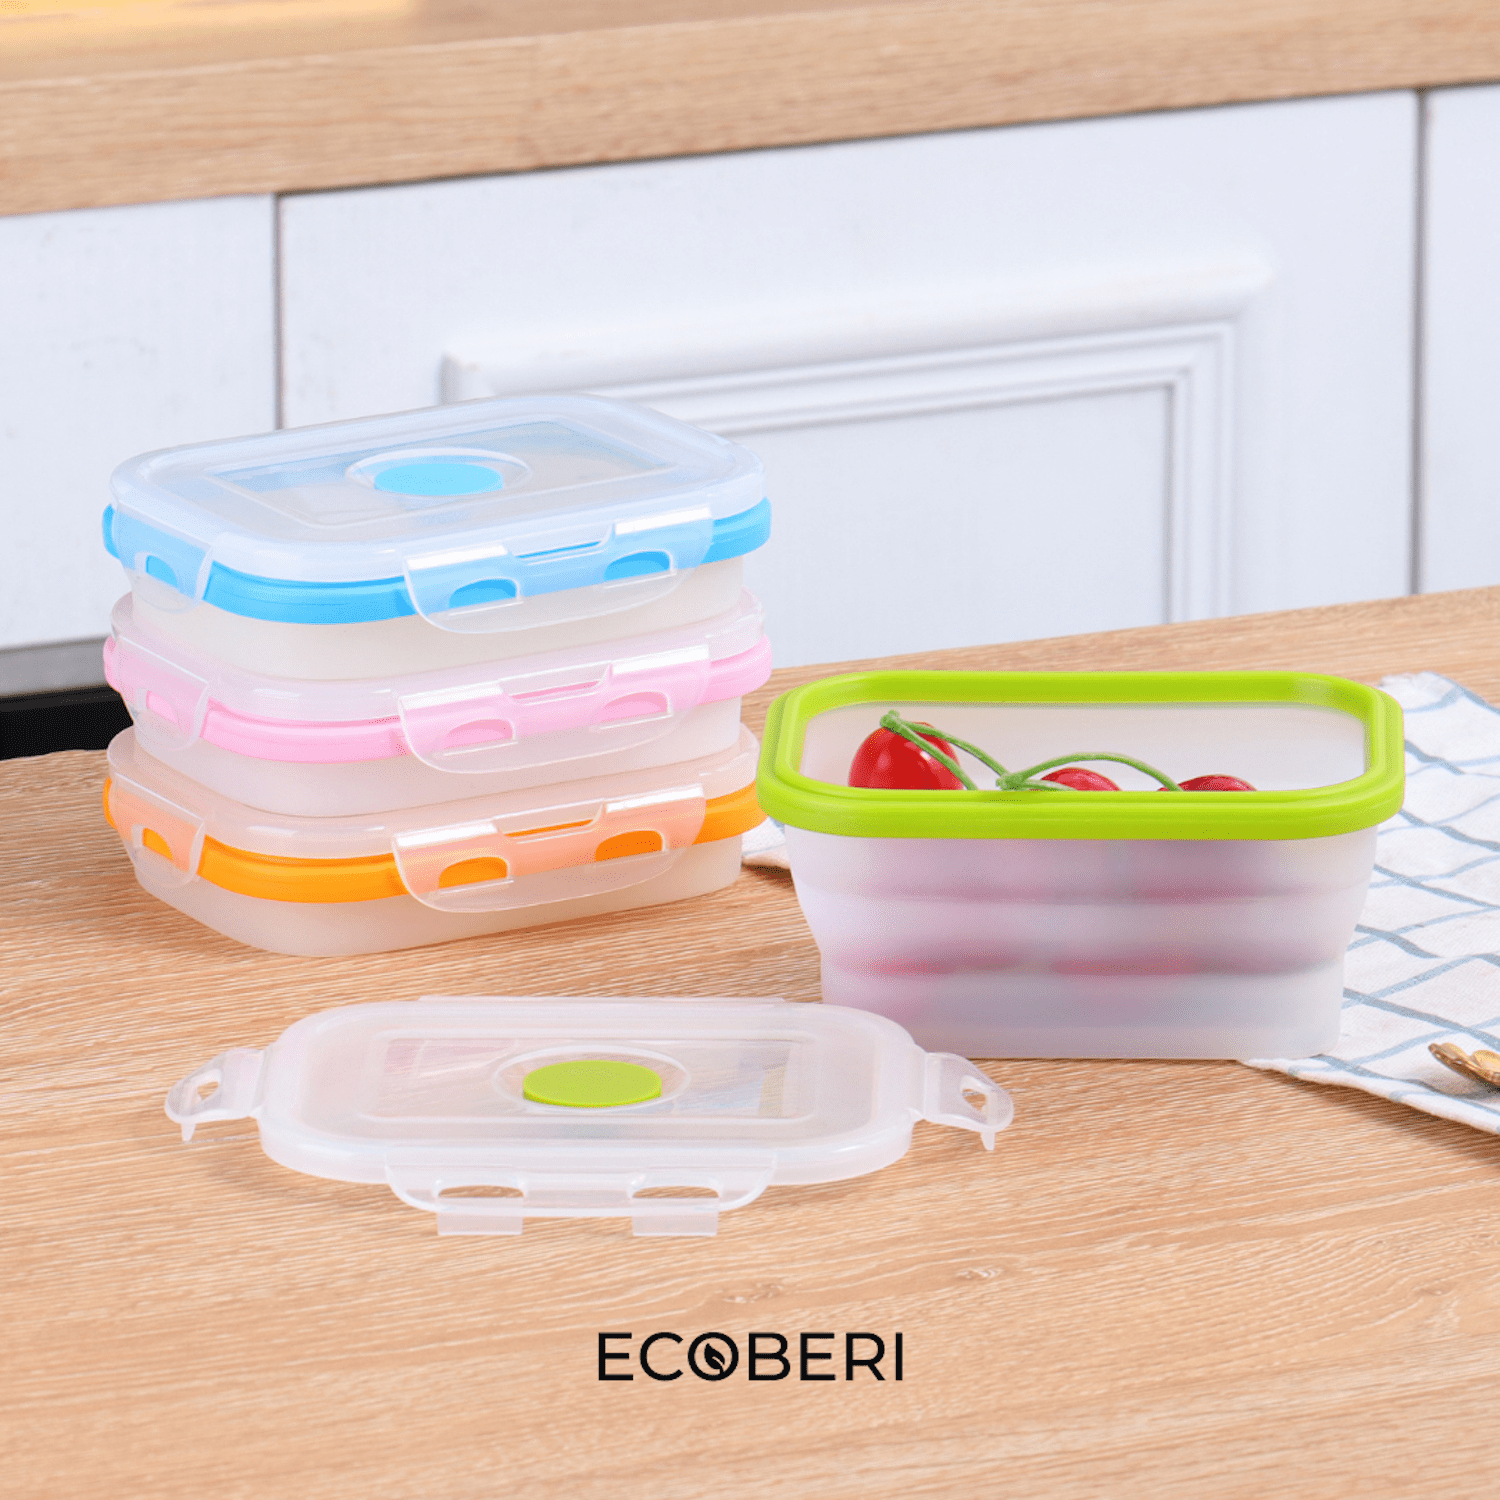 IvyMei Set of 4 Collapsible Food Storage Containers with Lids Portable  Silicone Food Containers Microwave Freezer Safe Lunch Box